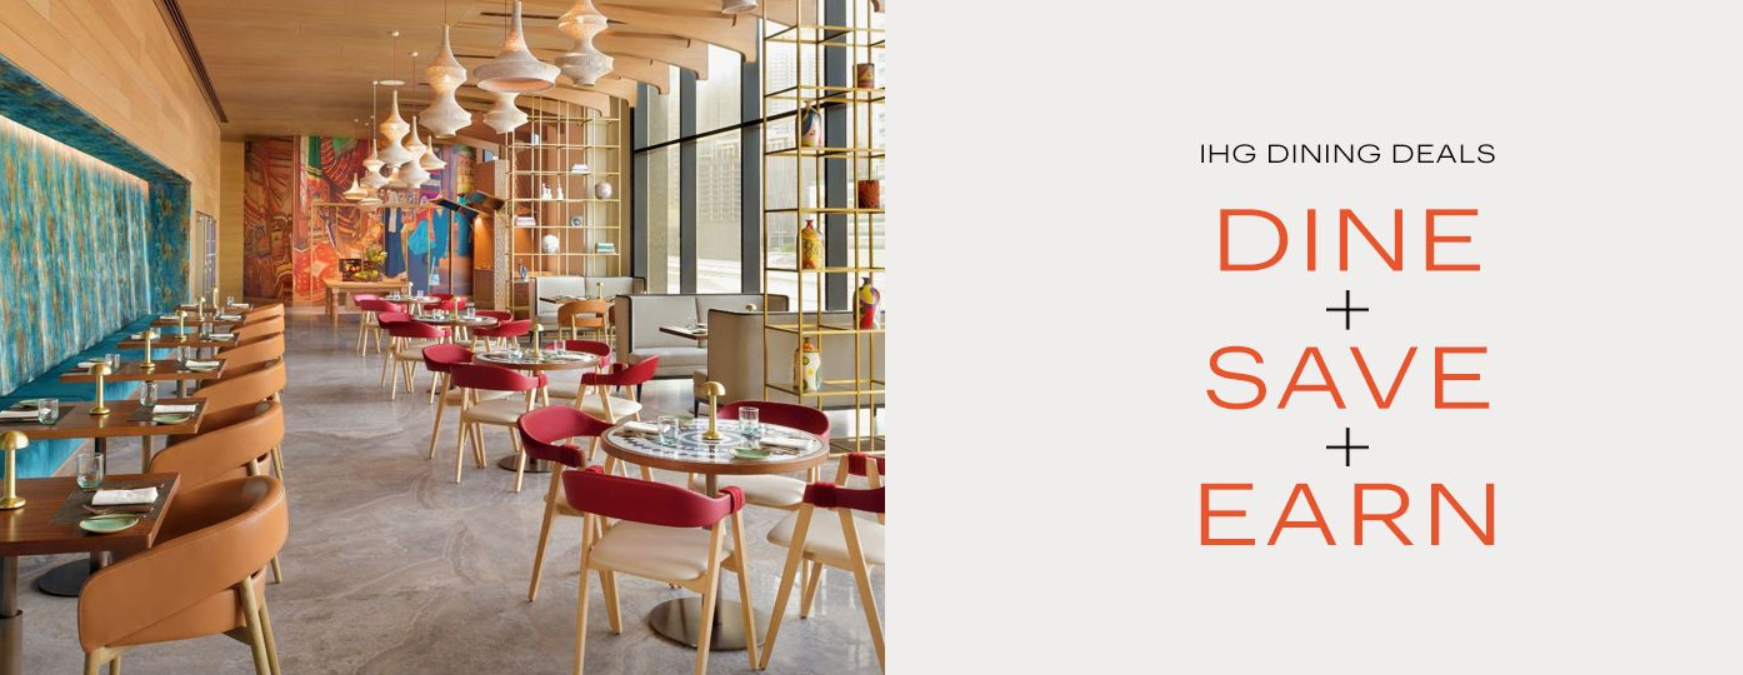 Receive up to 30% OFF when you join IHG Rewards Club